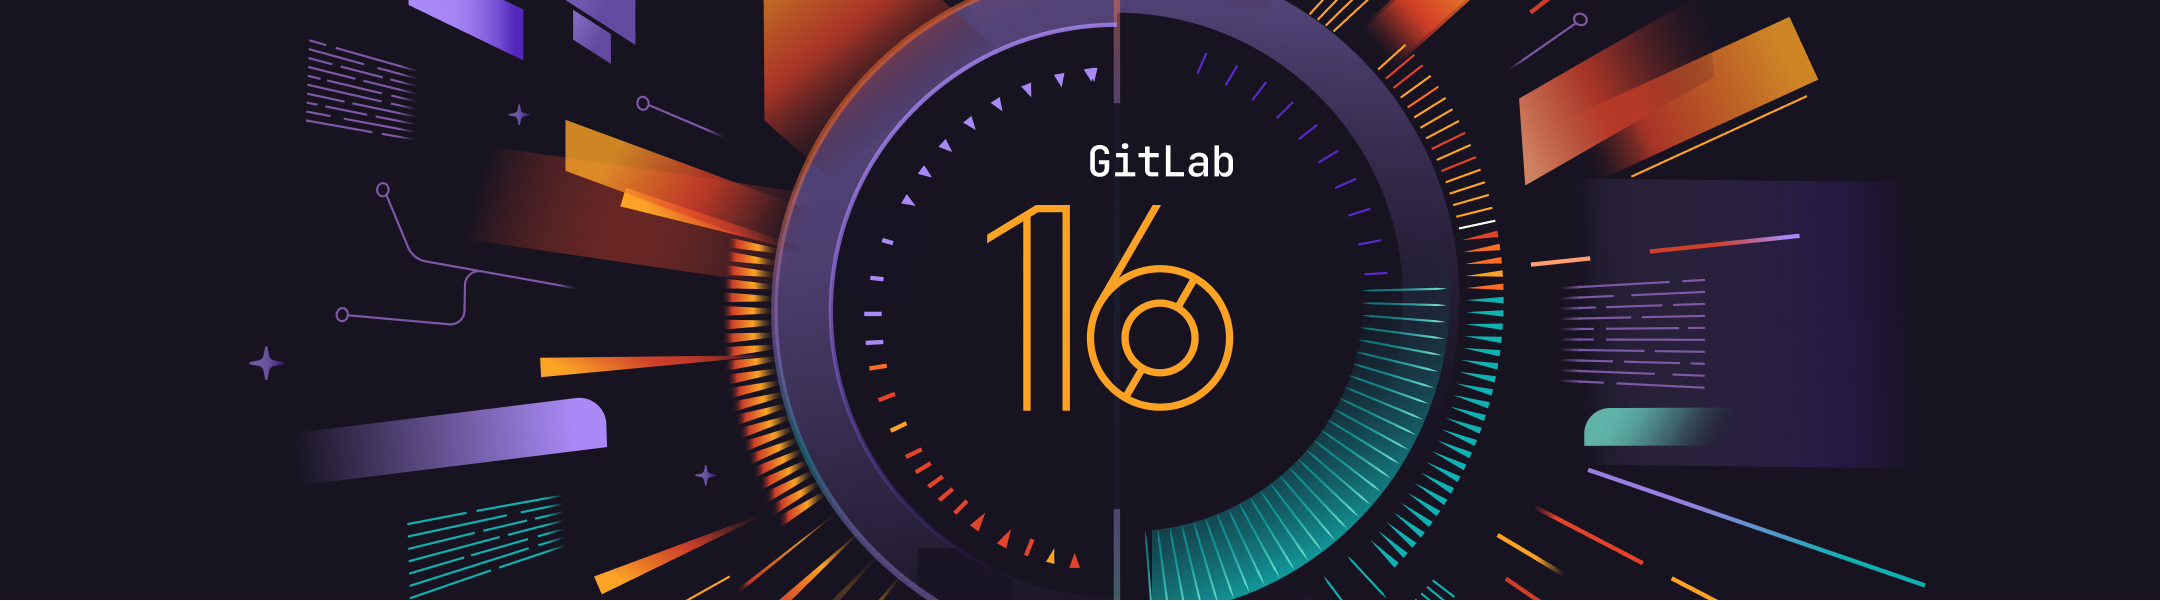  GitLab 16.0 released with Value Streams Dashboards, improved AI-powered Code Suggestions, remote development workspaces, more powerful SaaS runners, 